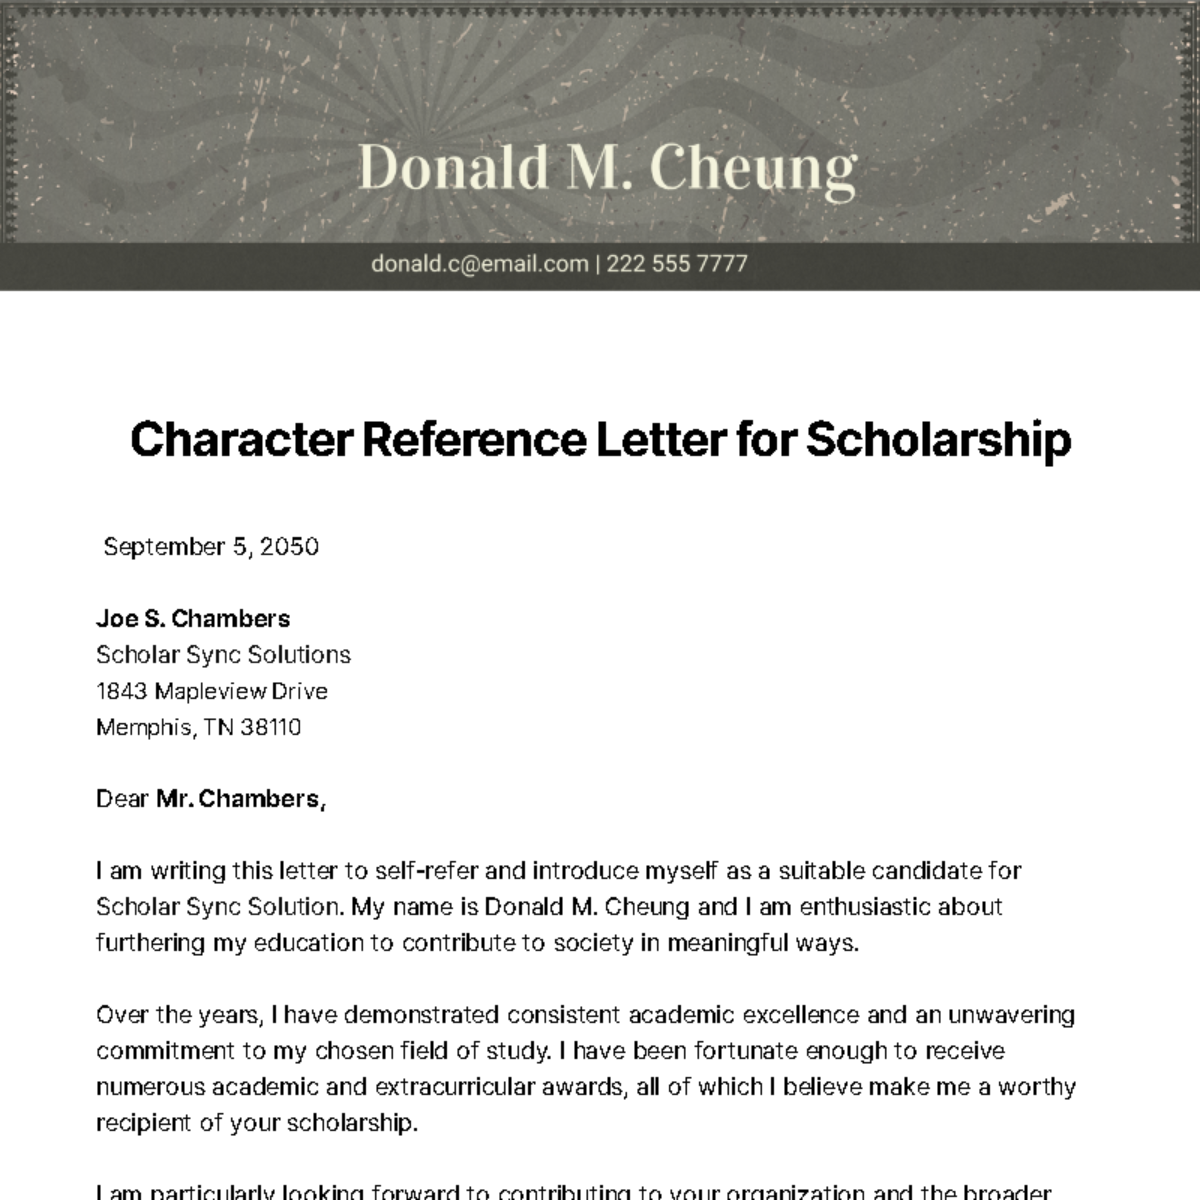 Character Reference Letter for Scholarship Template